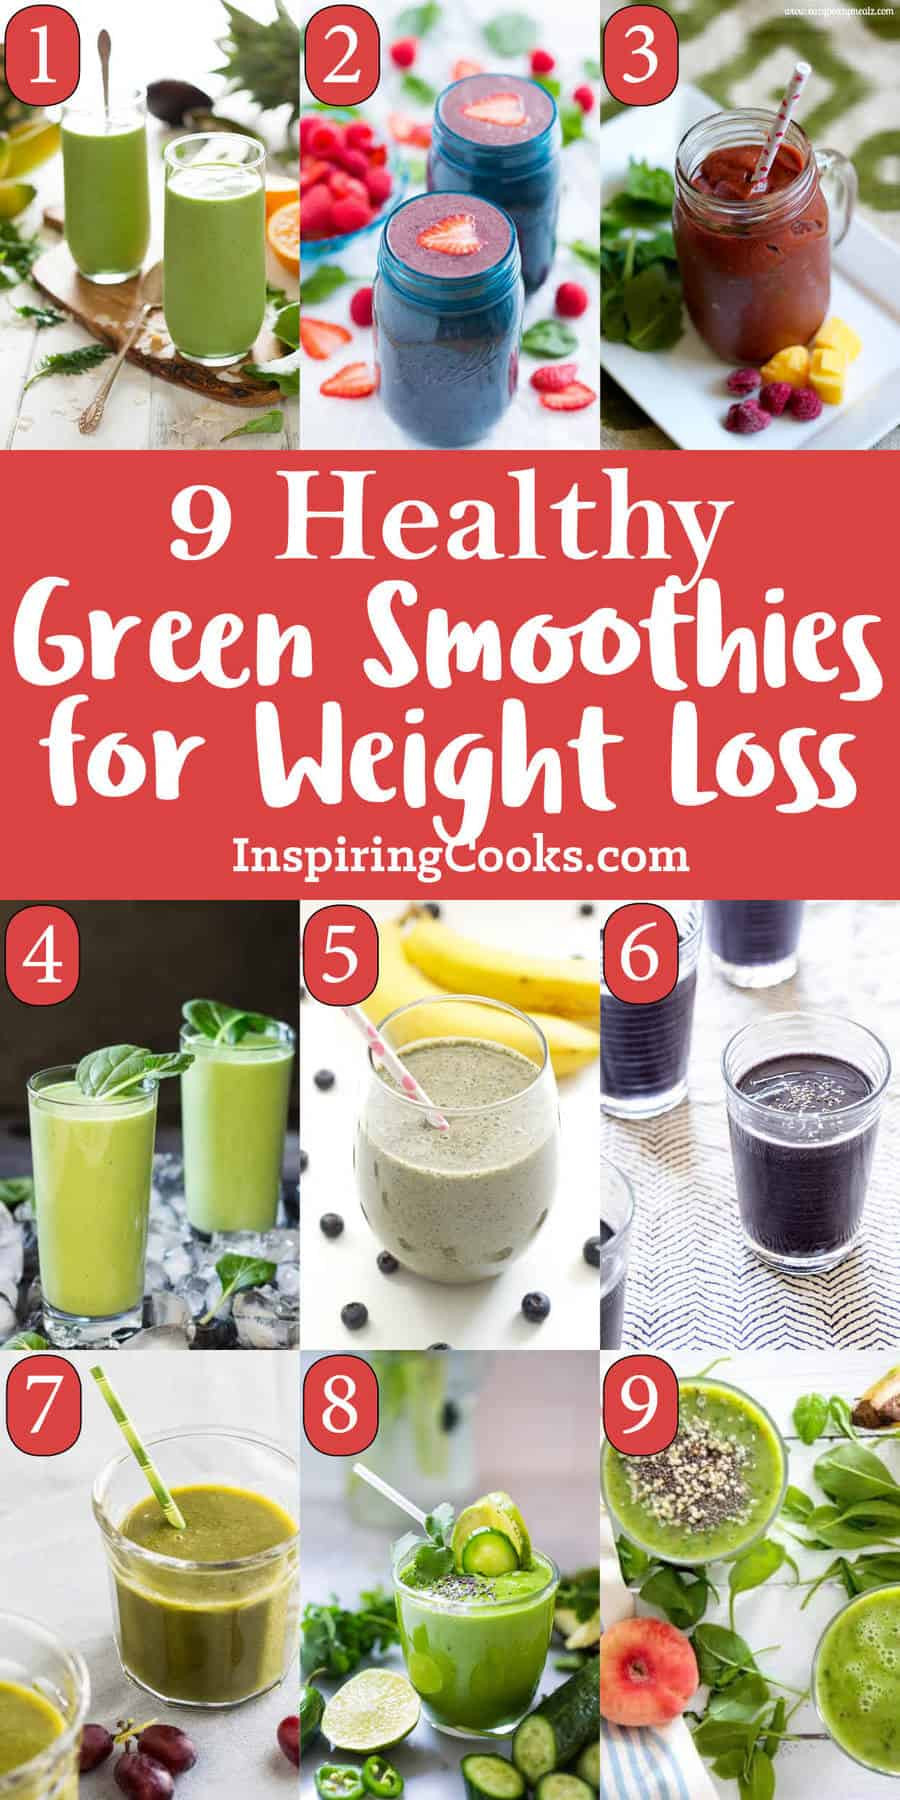 Healthy Green Smoothies For Weight Loss
 The Best 9 Healthy Green Smoothies for Weight Loss